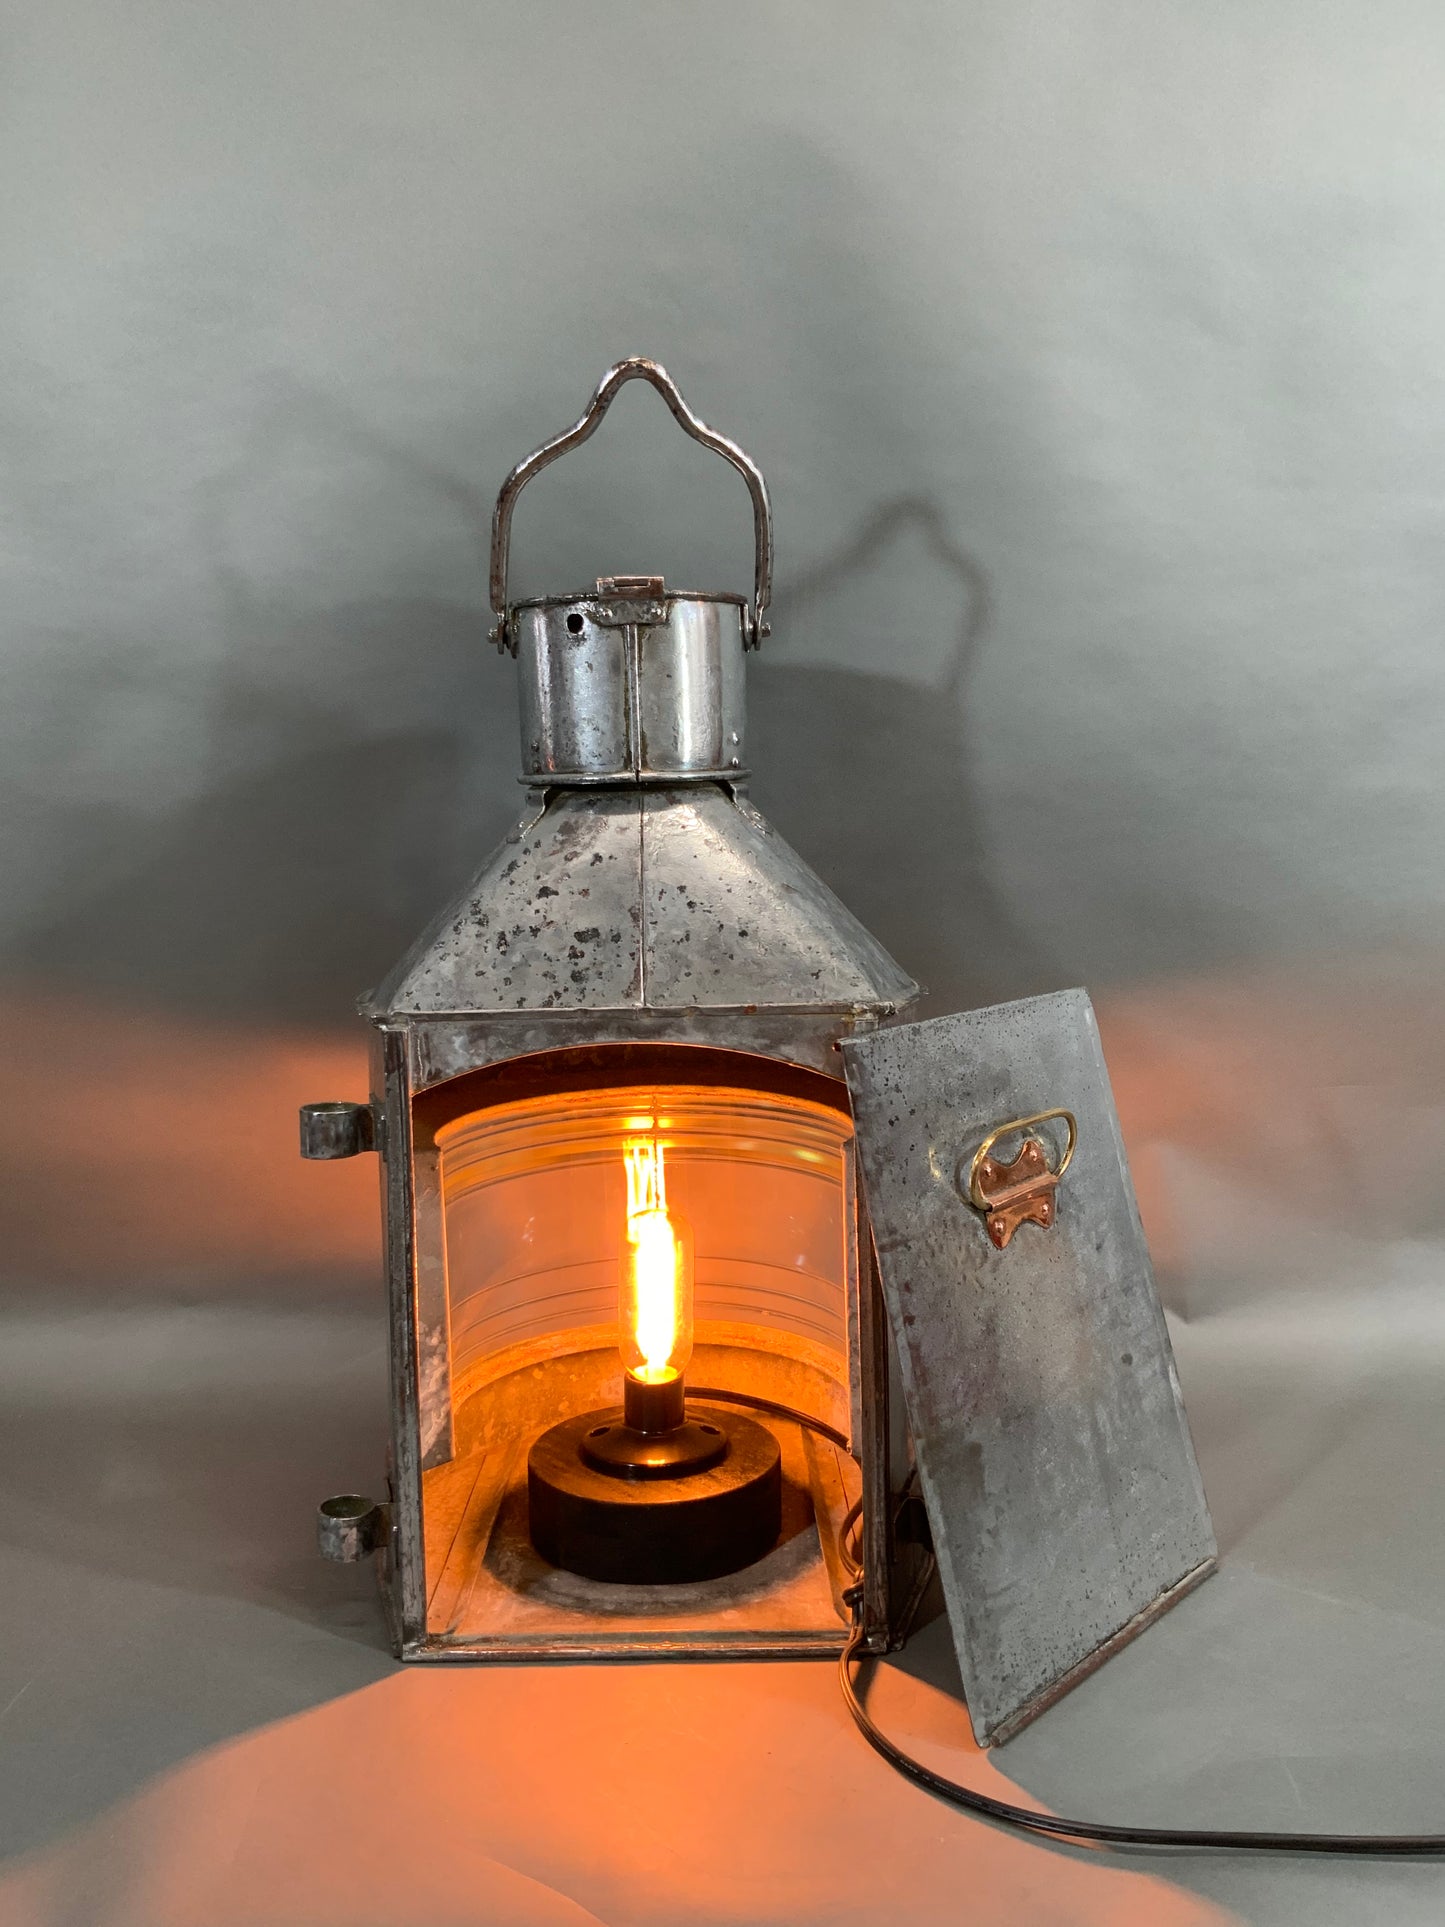 Polished Steel Ship's Masthead Lantern with Fresnel Lens by Meteorite "C20696" - Lannan Gallery